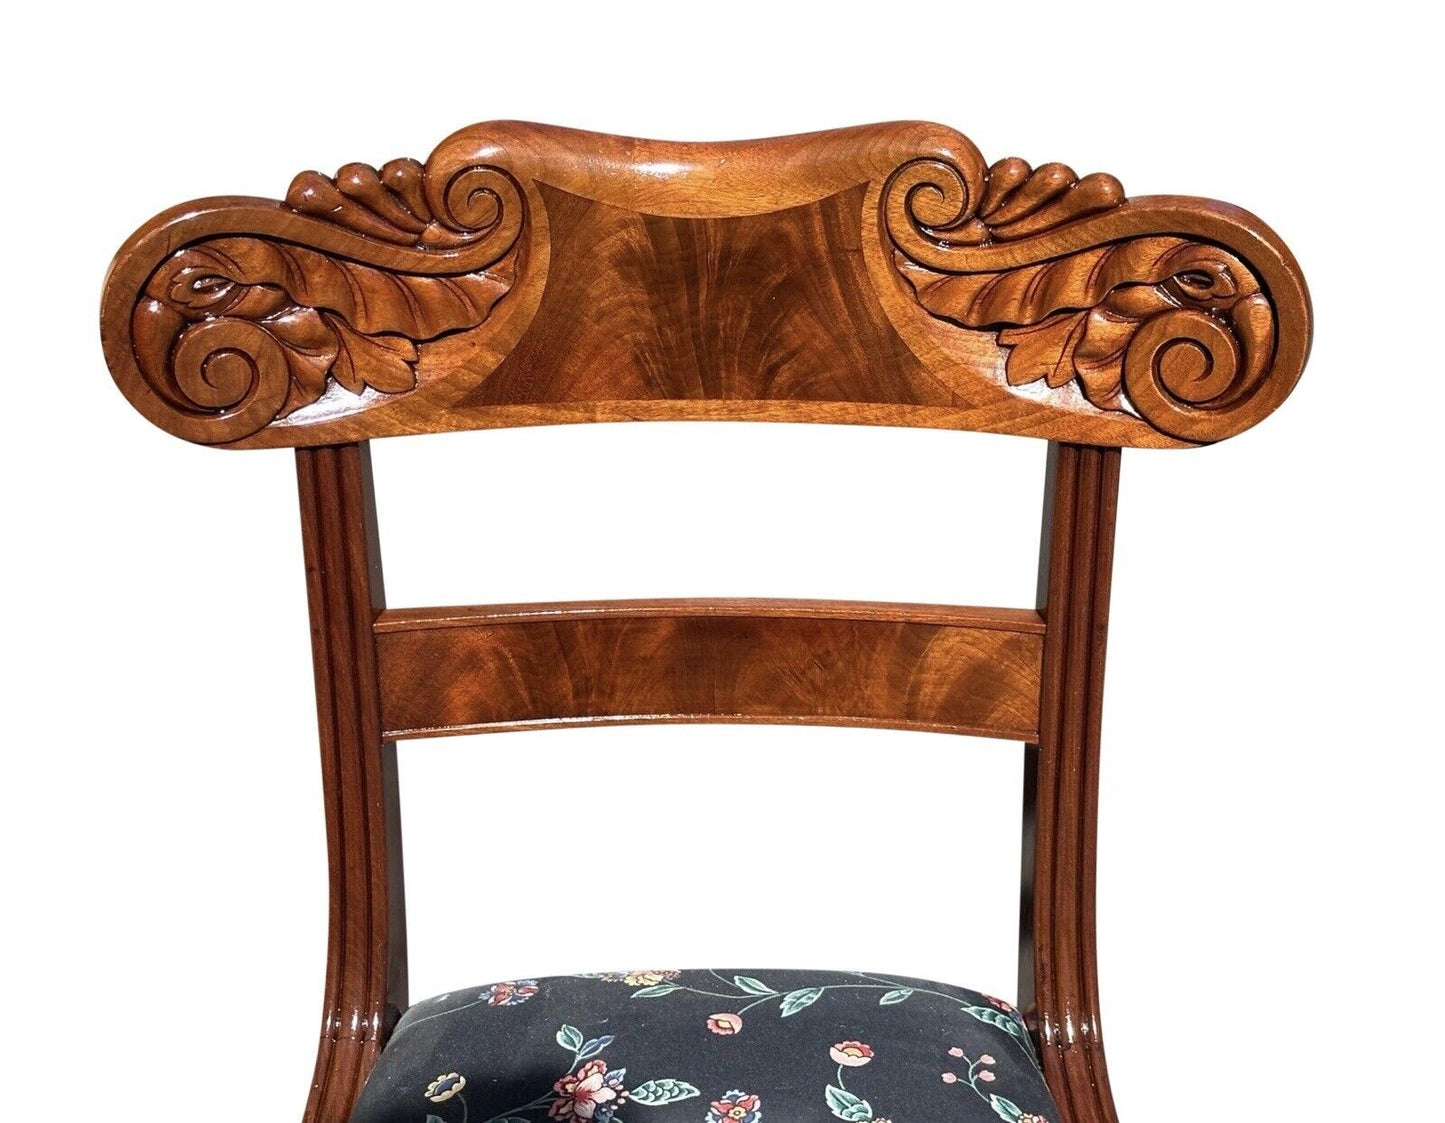 19th Century Antique Classical Mahogany Side Chair With Elaborately Carved Crest